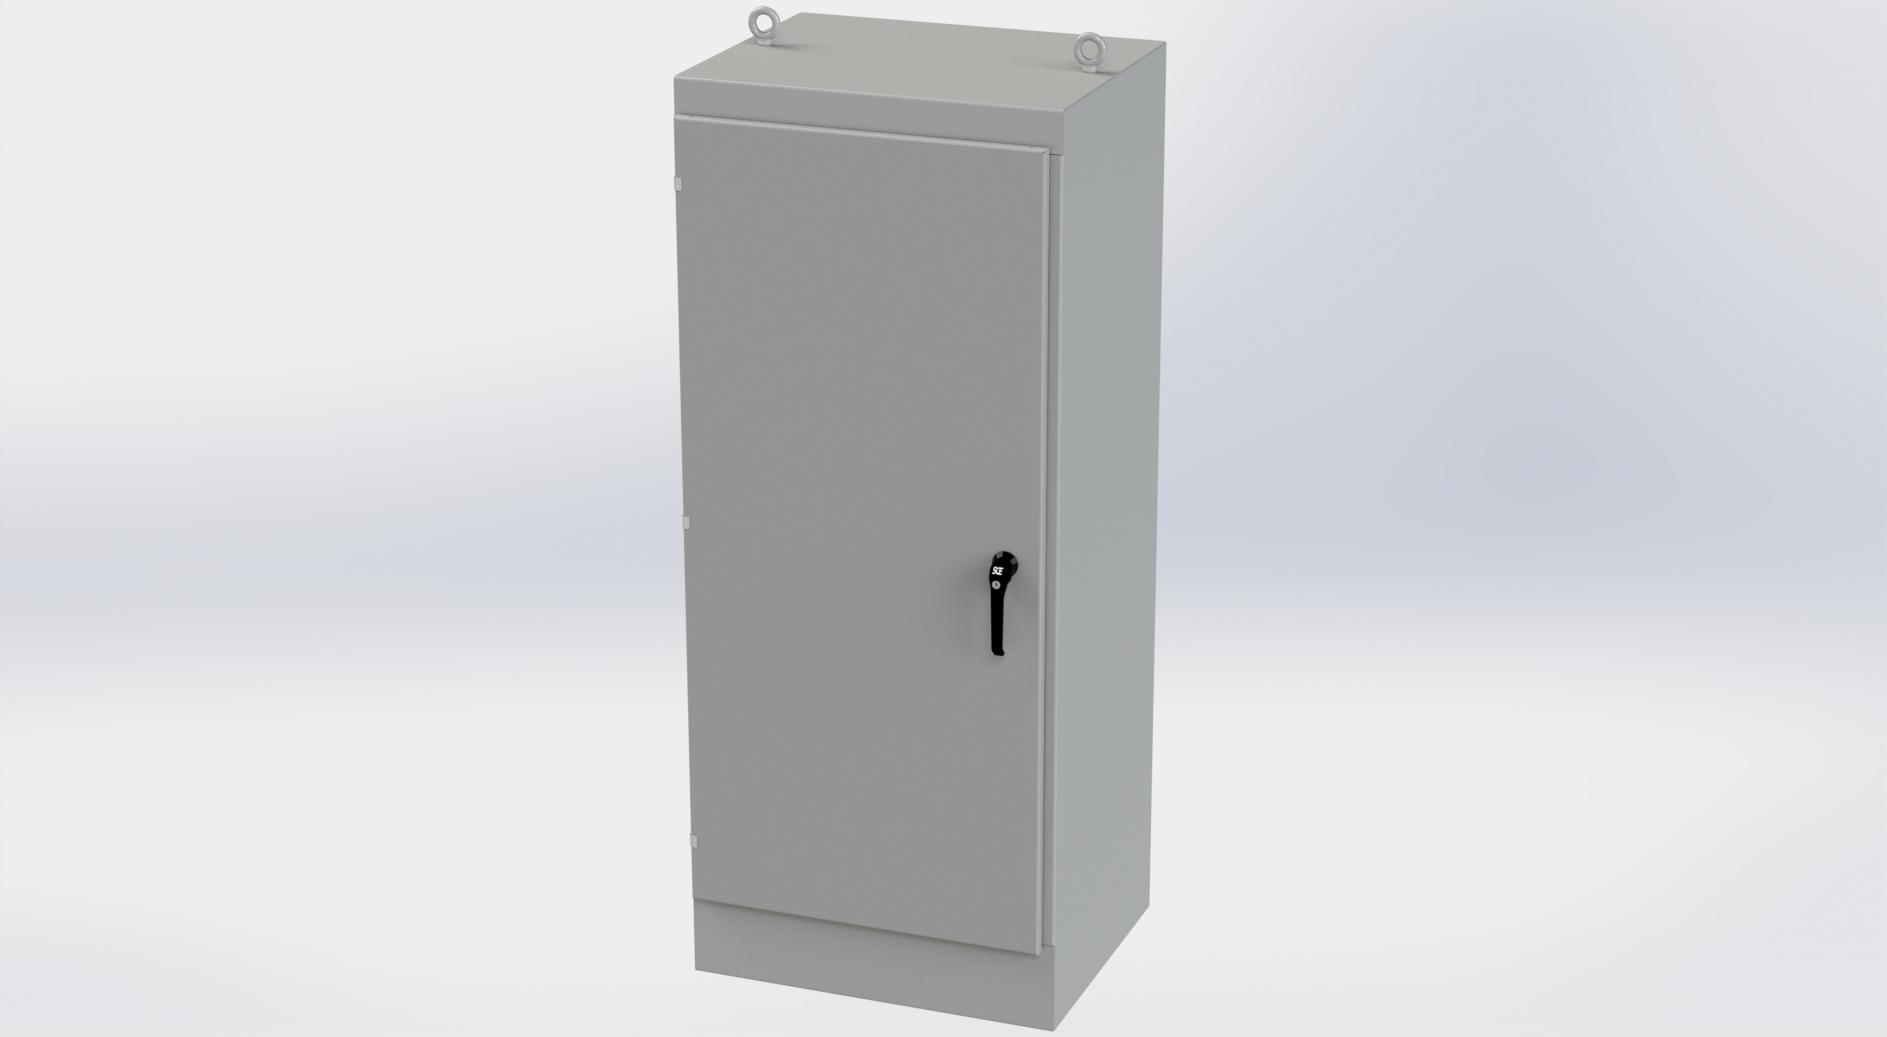 Saginaw Control SCE-72EL3024FS EL FS Enclosure, Height:72.00", Width:30.00", Depth:24.00", ANSI-61 gray powder coat inside and out. Optional sub-panels are powder coated white.